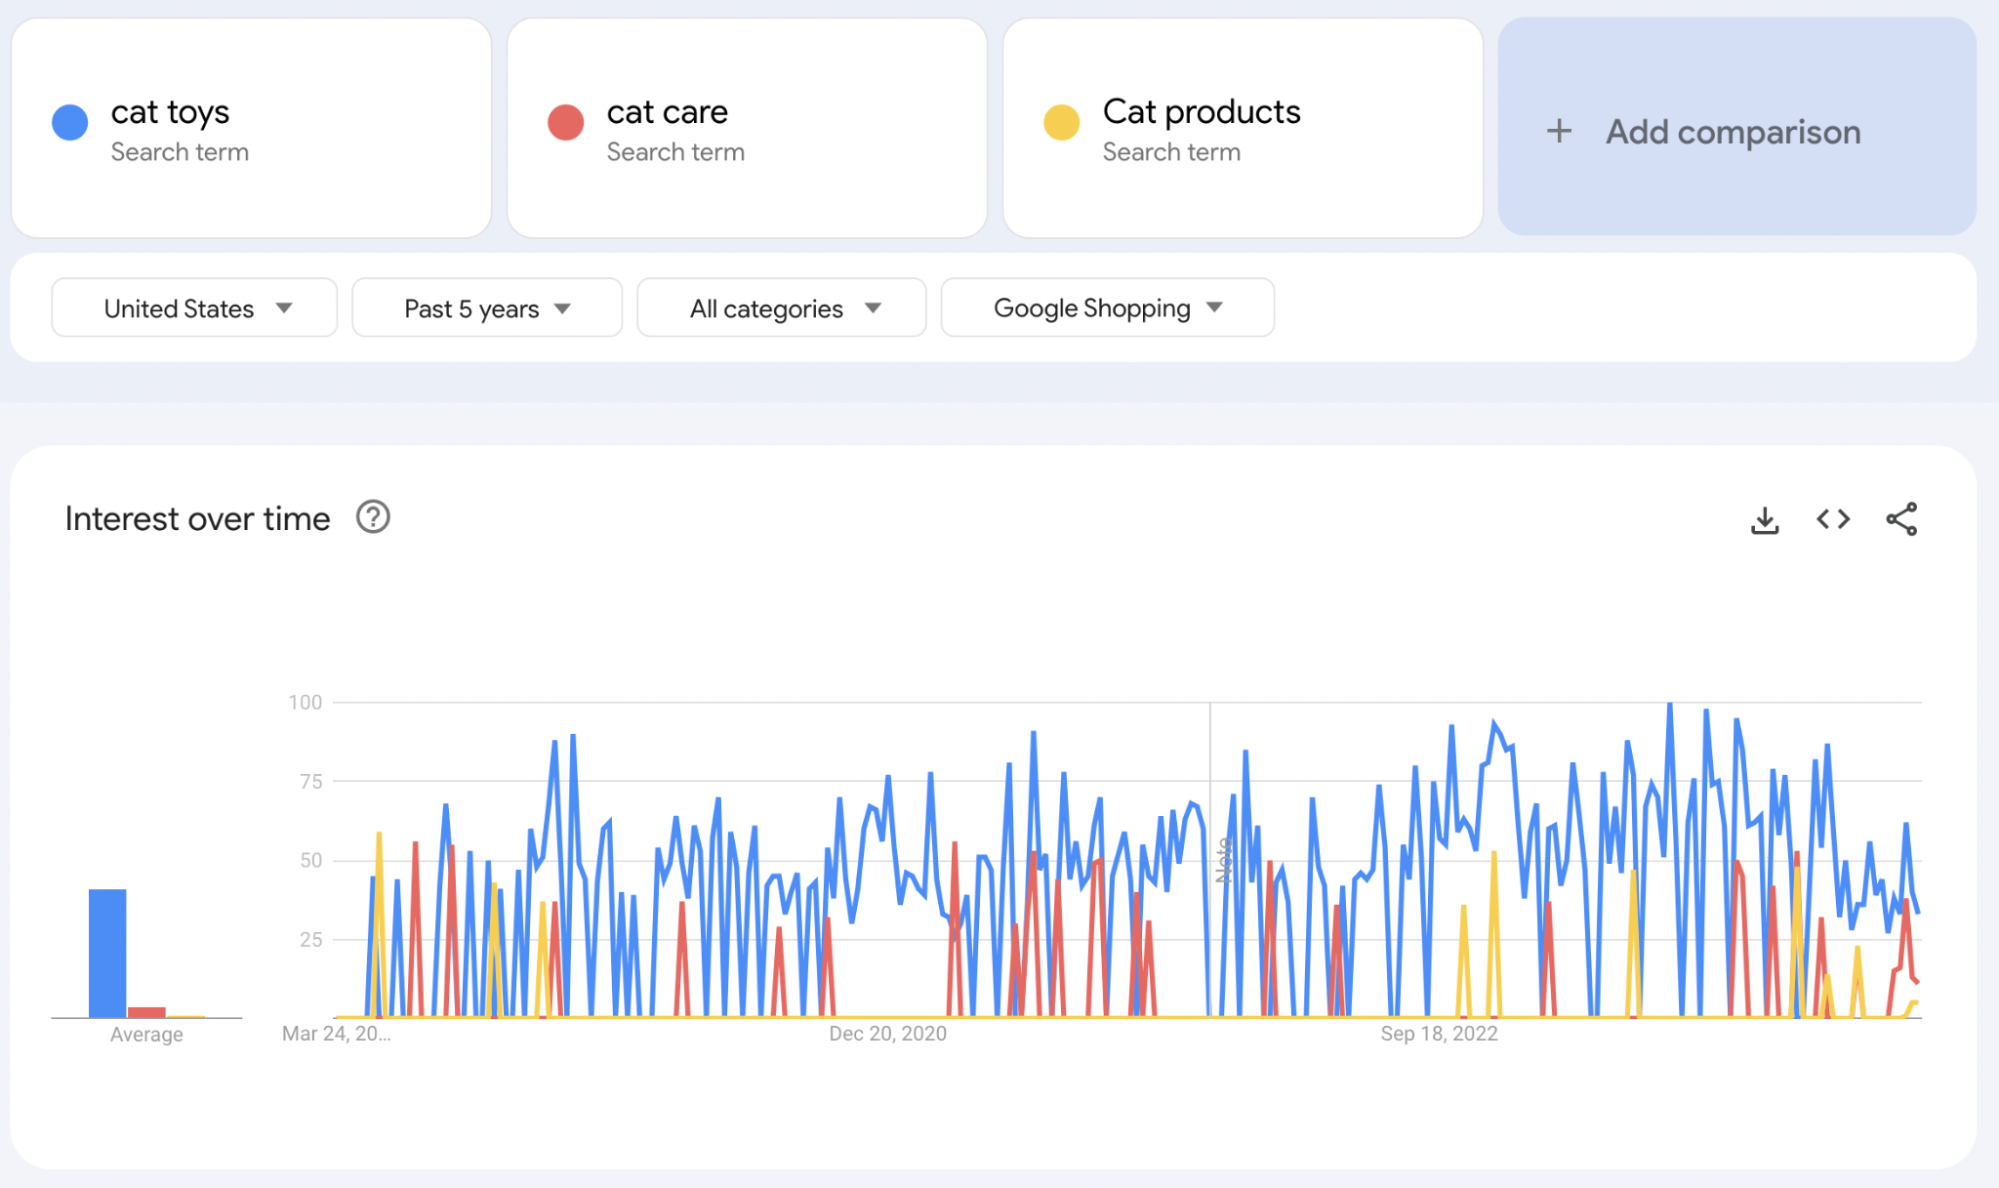 Google Trends comparison between “cat toys”, “cat care”, and “cat products”.